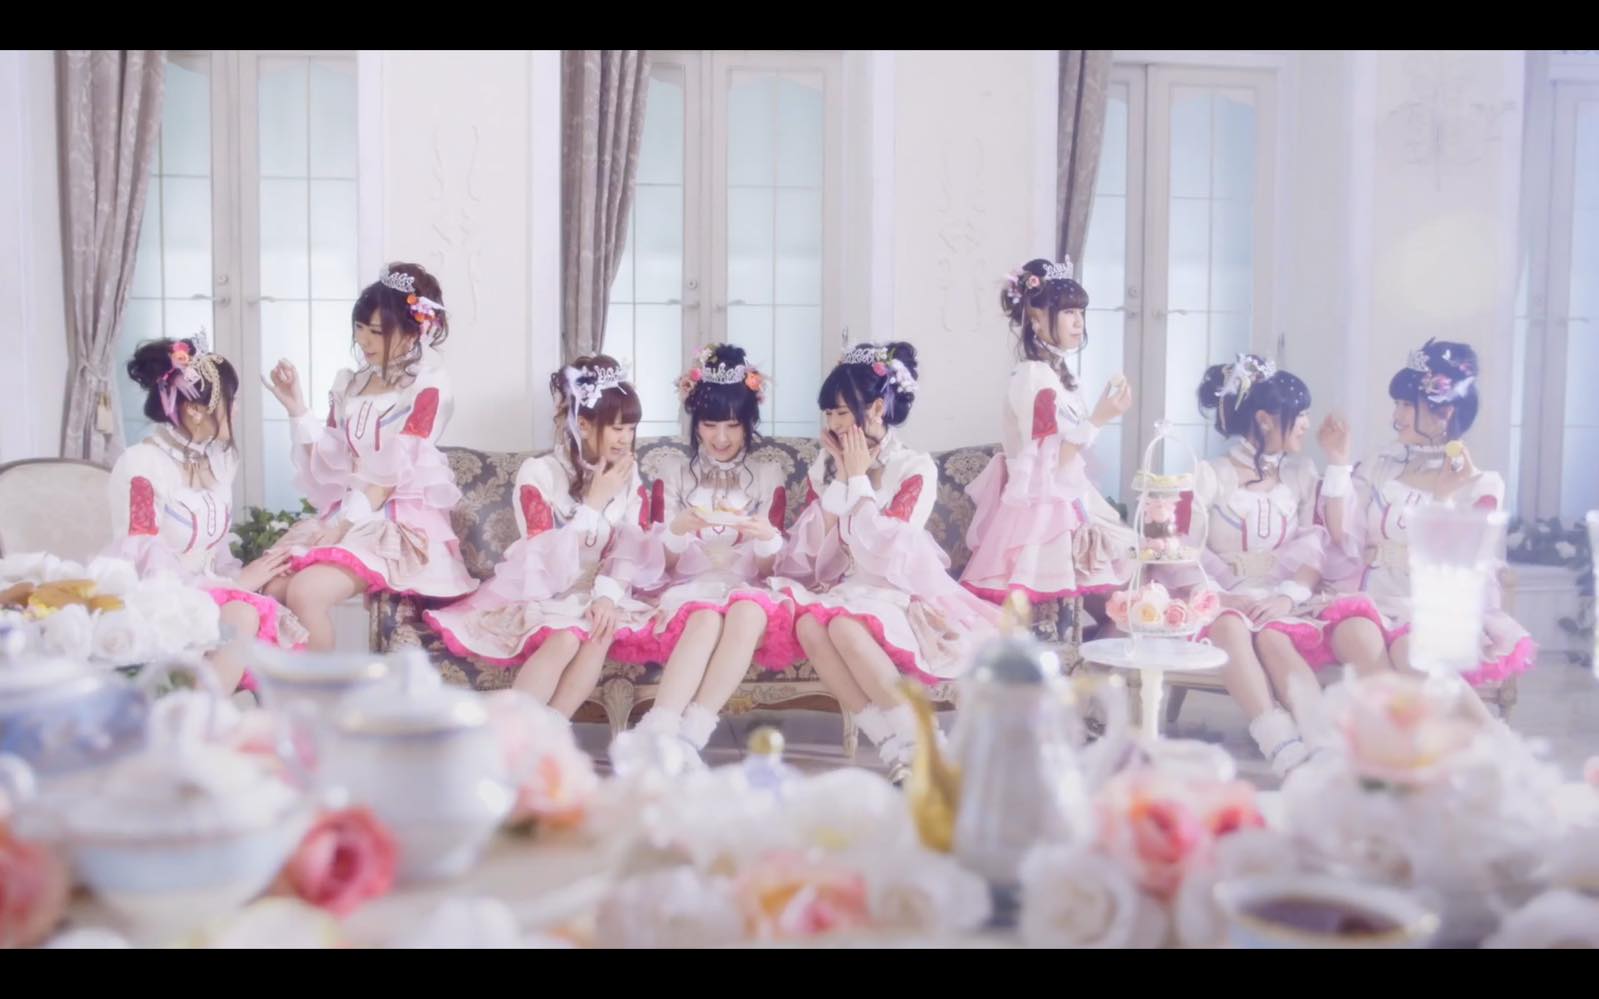 Houkago Princess Live Like French Royalty in the MV for “Junpaku Antoinette”!